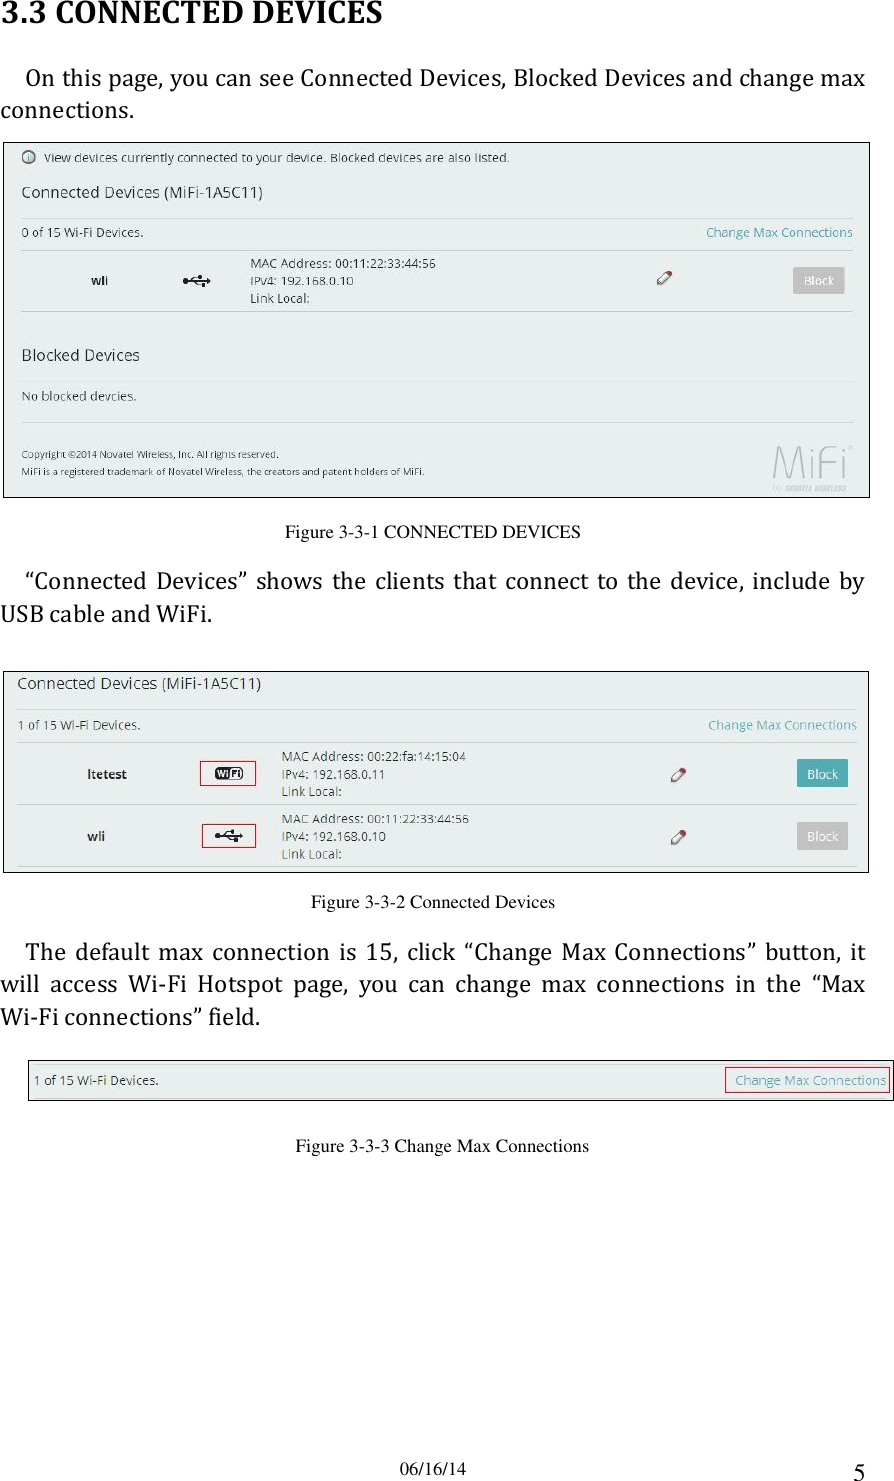 06/16/14 5 3.3 CONNECTED DEVICES On this page, you can see Connected Devices, Blocked Devices and change max connections.  Figure 3-3-1 CONNECTED DEVICES “Connected Devices”  shows the  clients that  connect to the  device,  include  by USB cable and WiFi.  Figure 3-3-2 Connected Devices The  default  max  connection  is  15,  click  “Change  Max  Connections”  button,  it will  access  Wi-Fi  Hotspot  page,  you  can  change  max  connections  in  the  “Max Wi-Fi connections” field.  Figure 3-3-3 Change Max Connections 